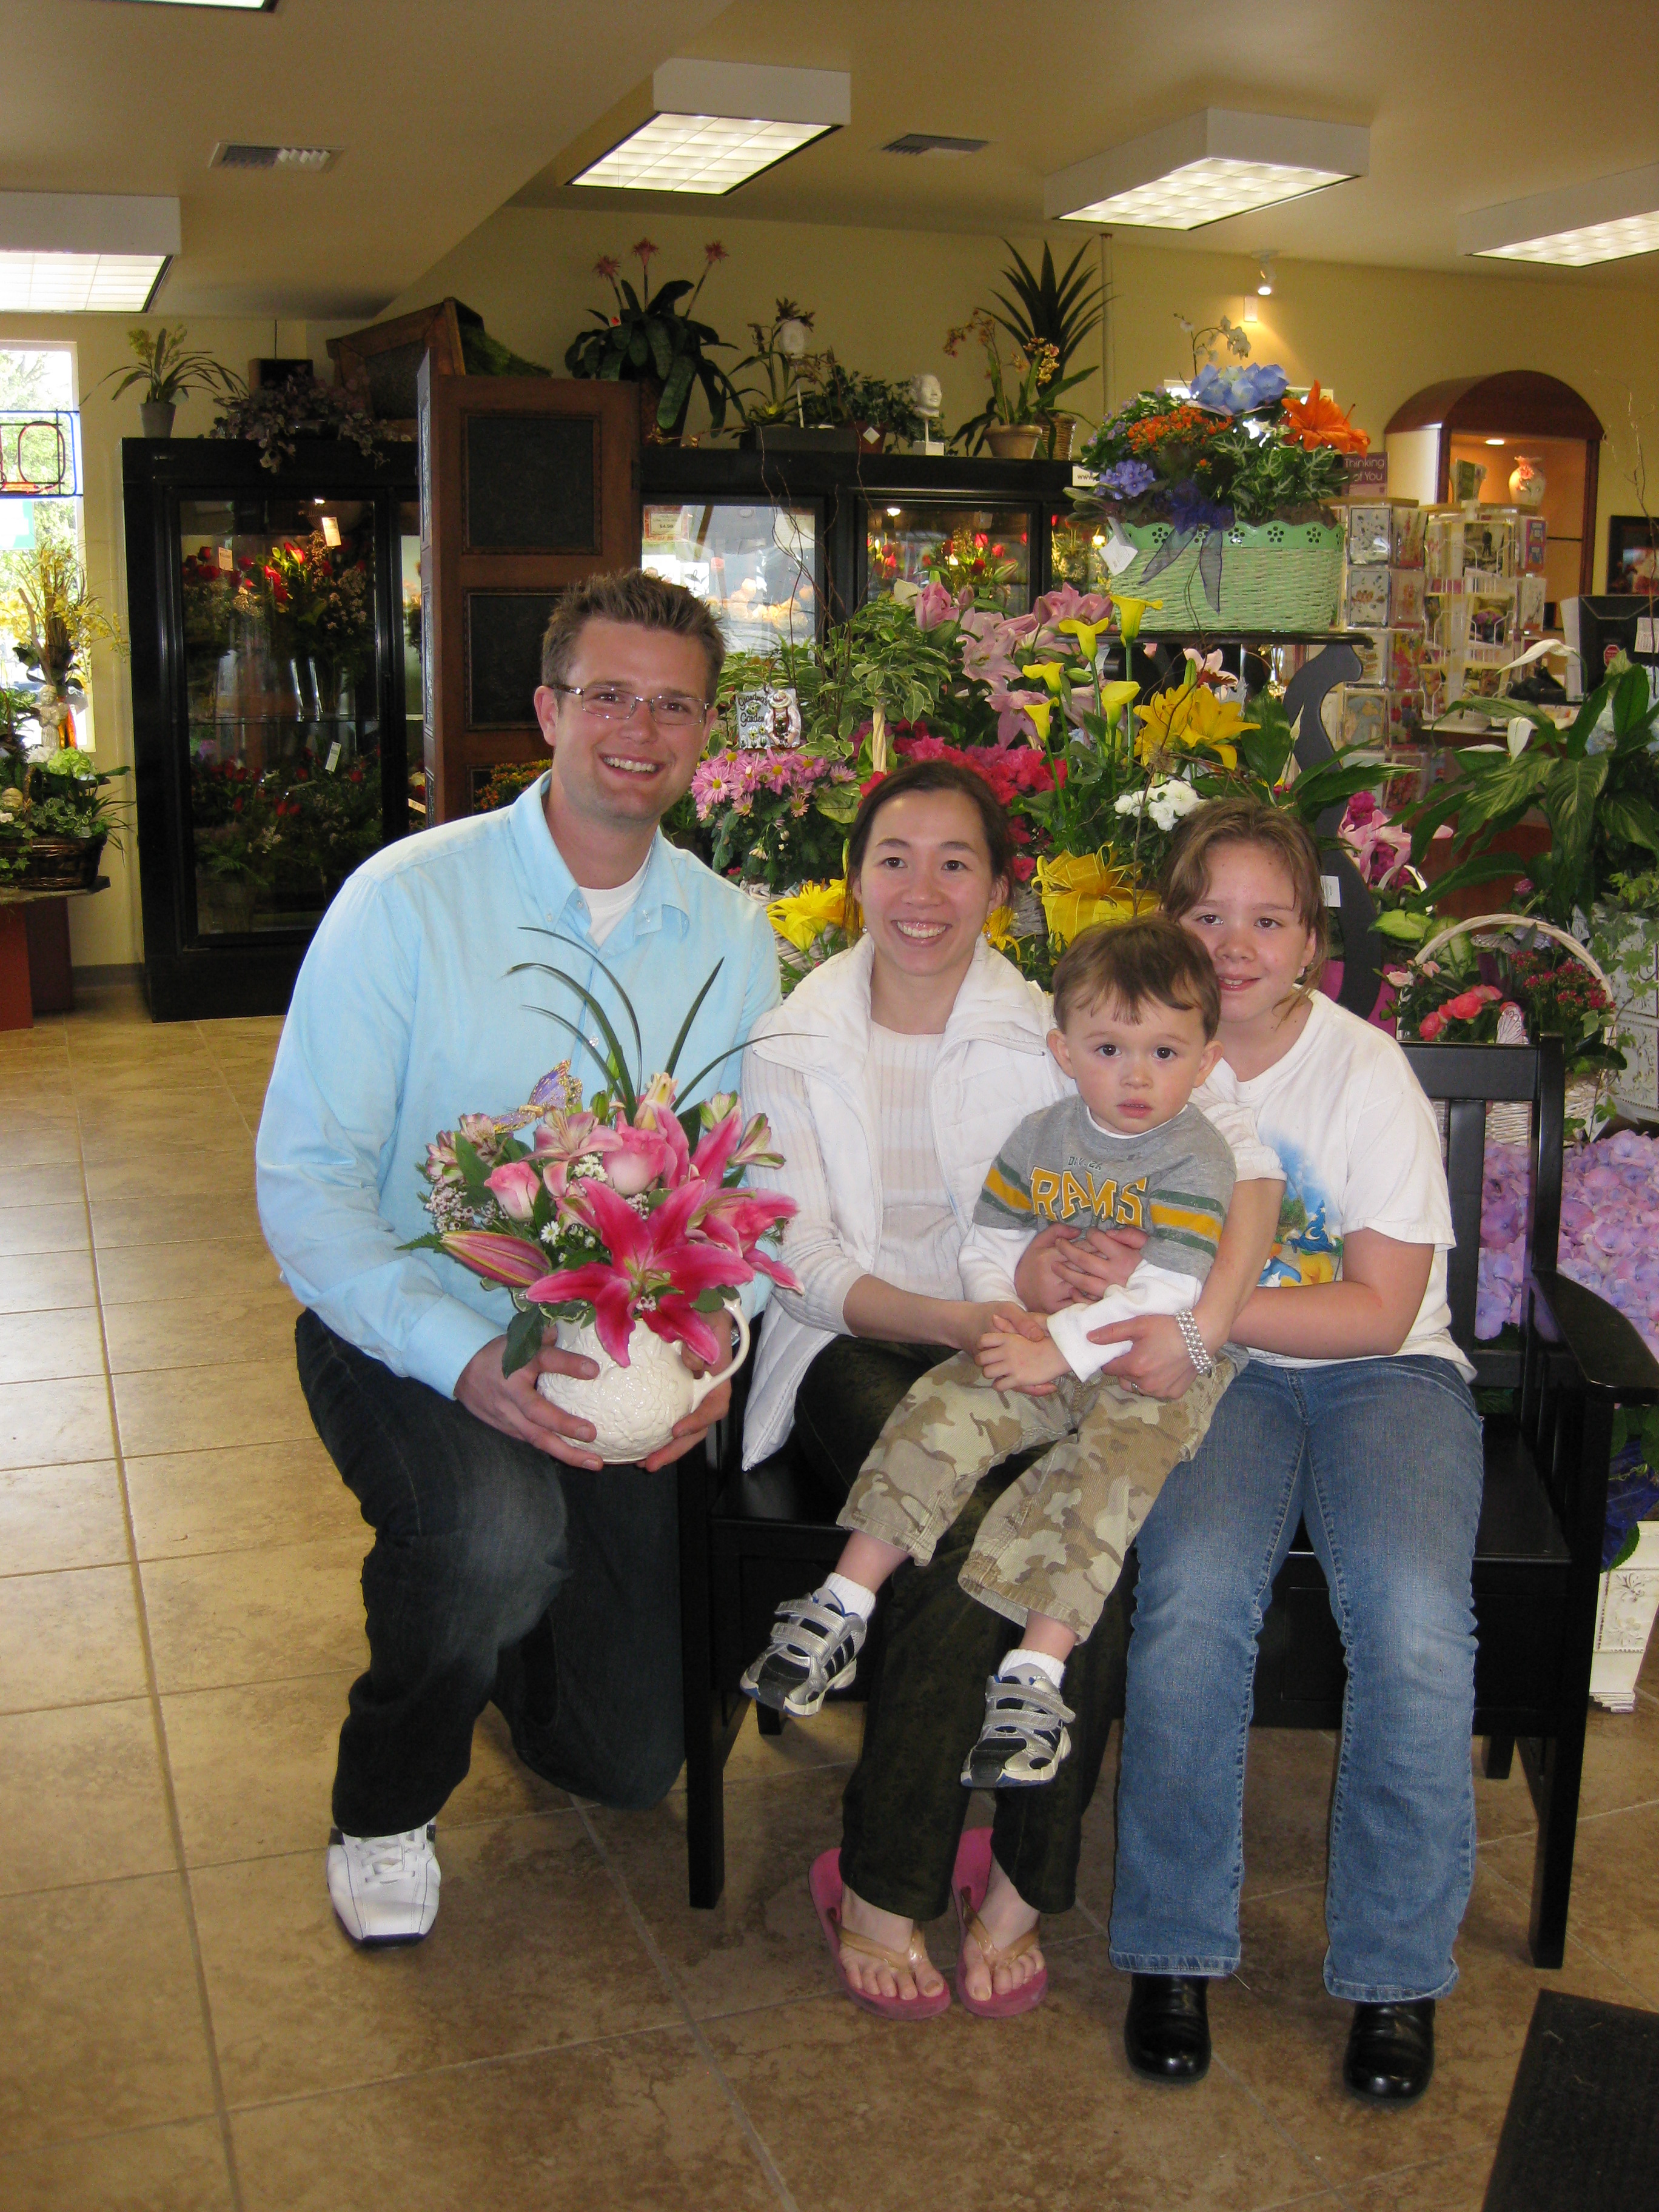 pictured: Adam Van Winkle (owner of Stadium Flowers) and Nu Truong (winner) with her two children.